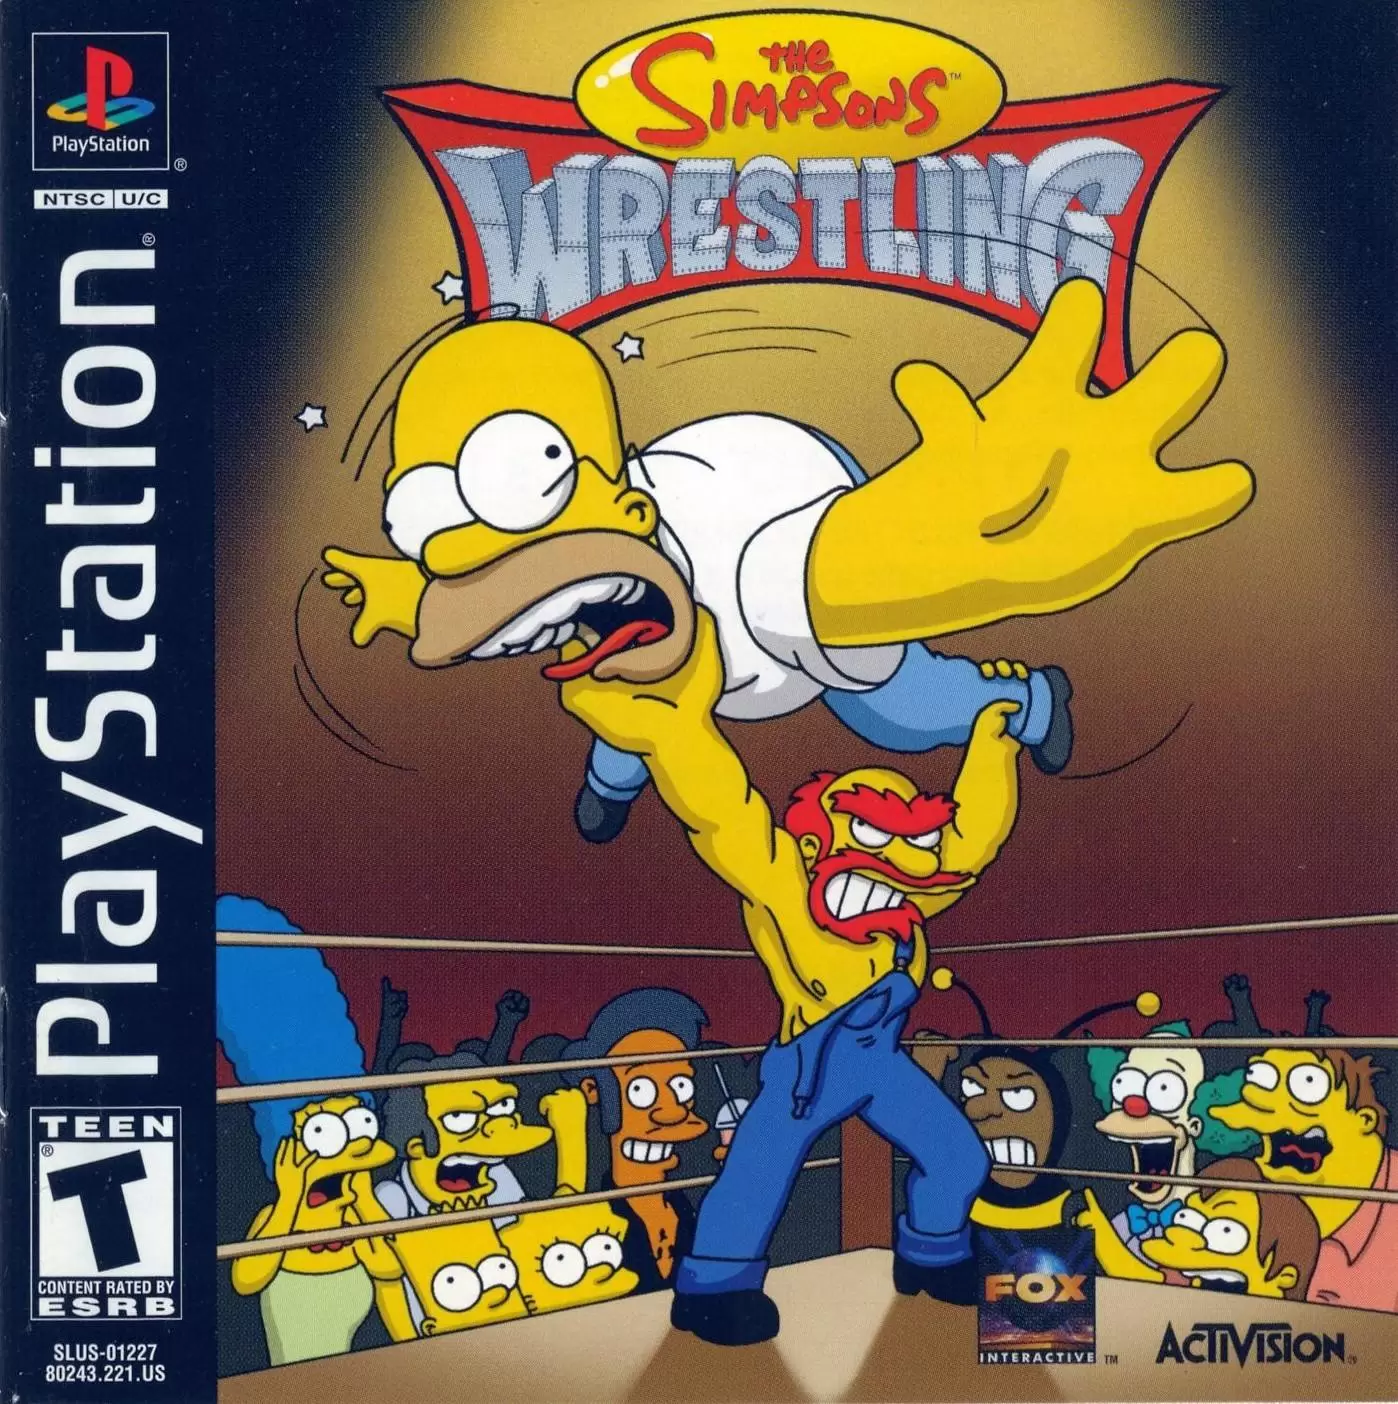 Playstation games - The Simpsons Wrestling (NTSC)